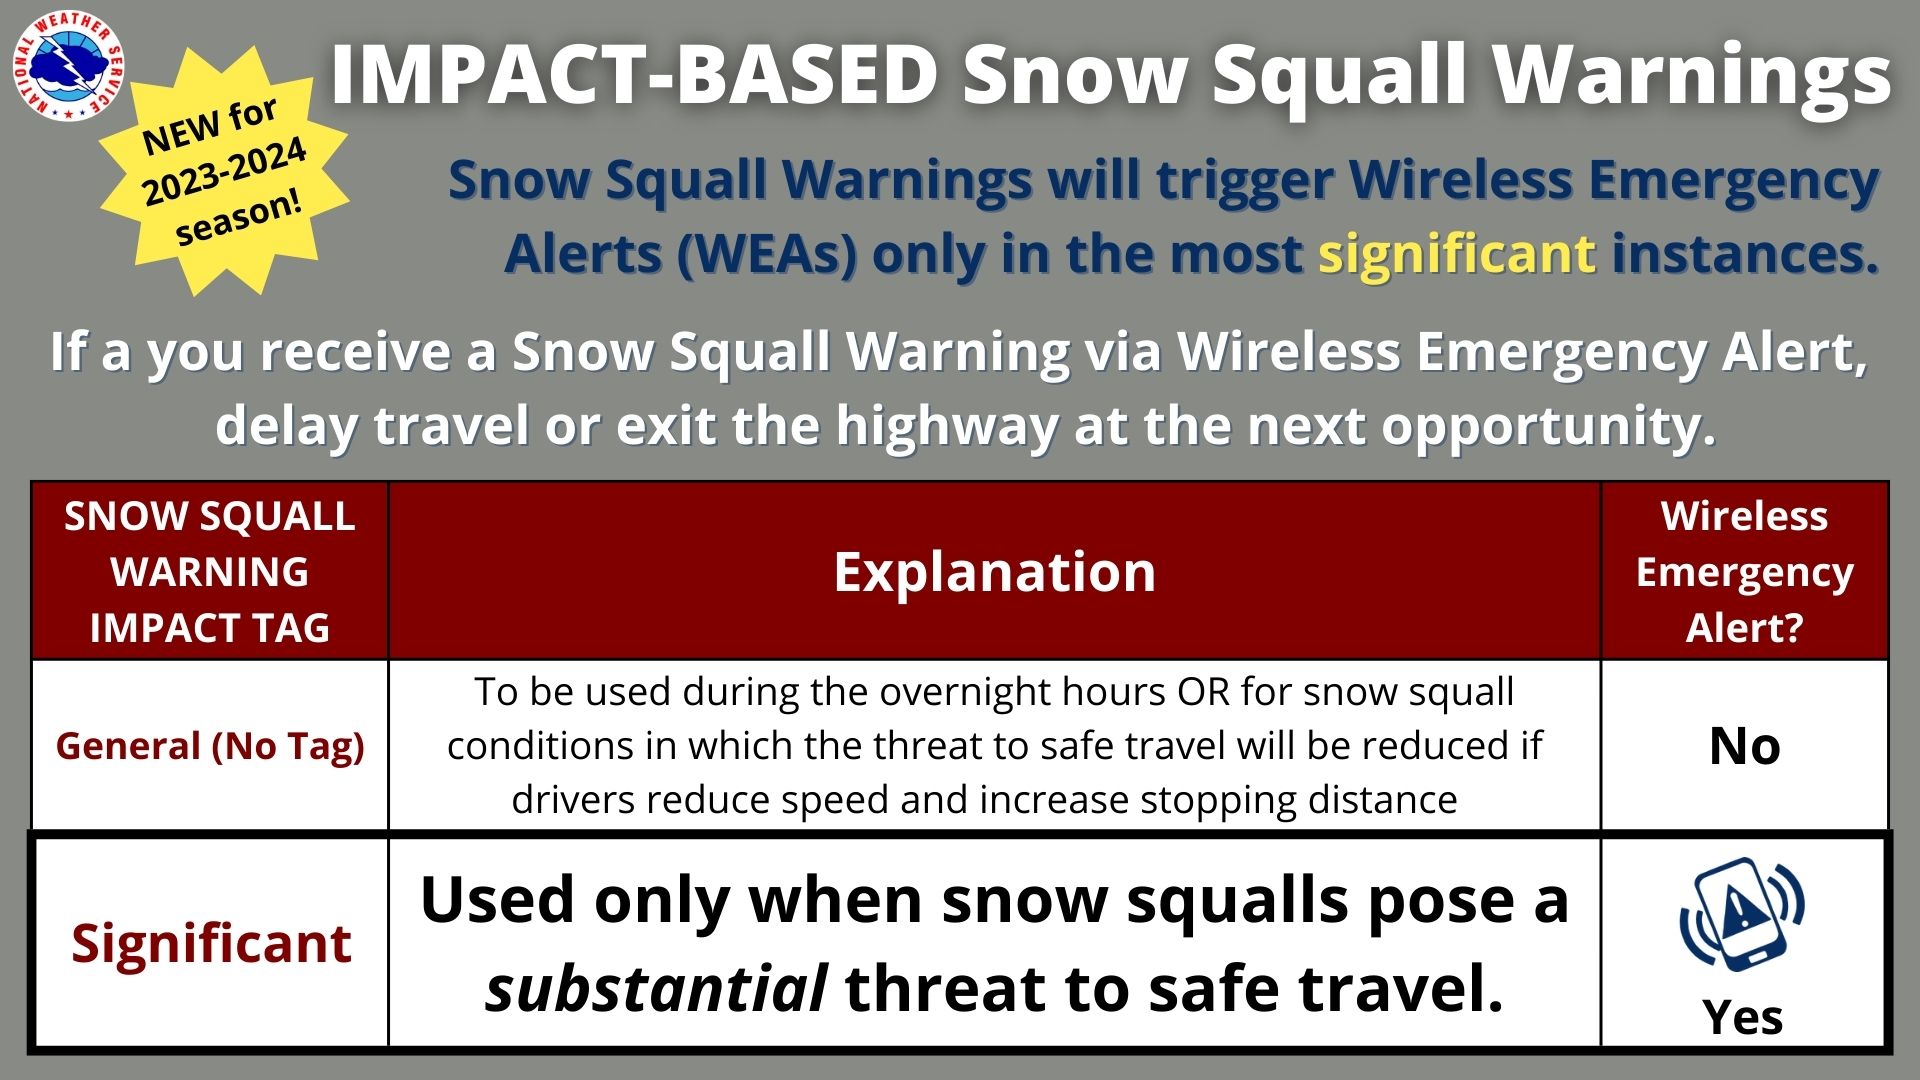 Impact Based Snow Squall Warnings: New for the 2023-2024 Season, Snow Squall Warnings will trigger Wireless Emergency Alerts (WEAs) only in the most significant instances. If you receive a Snow Squall Warning via WEA, delay travel or exit the highway at the next opportunity. General (No Tag) Snow Squall Warning: to be used during the overnight hours or for snow squall conditions in which the threat to safe travel will be reduced if drivers reduce speed and increase stopping distance. General Snow Squall Warnings will not send off WEAs. Significant Snow Squall Warning: Used only when snow squalls pose a substantial threat to safe travel. Significant Snow Squall Warnings will send off WEAs.